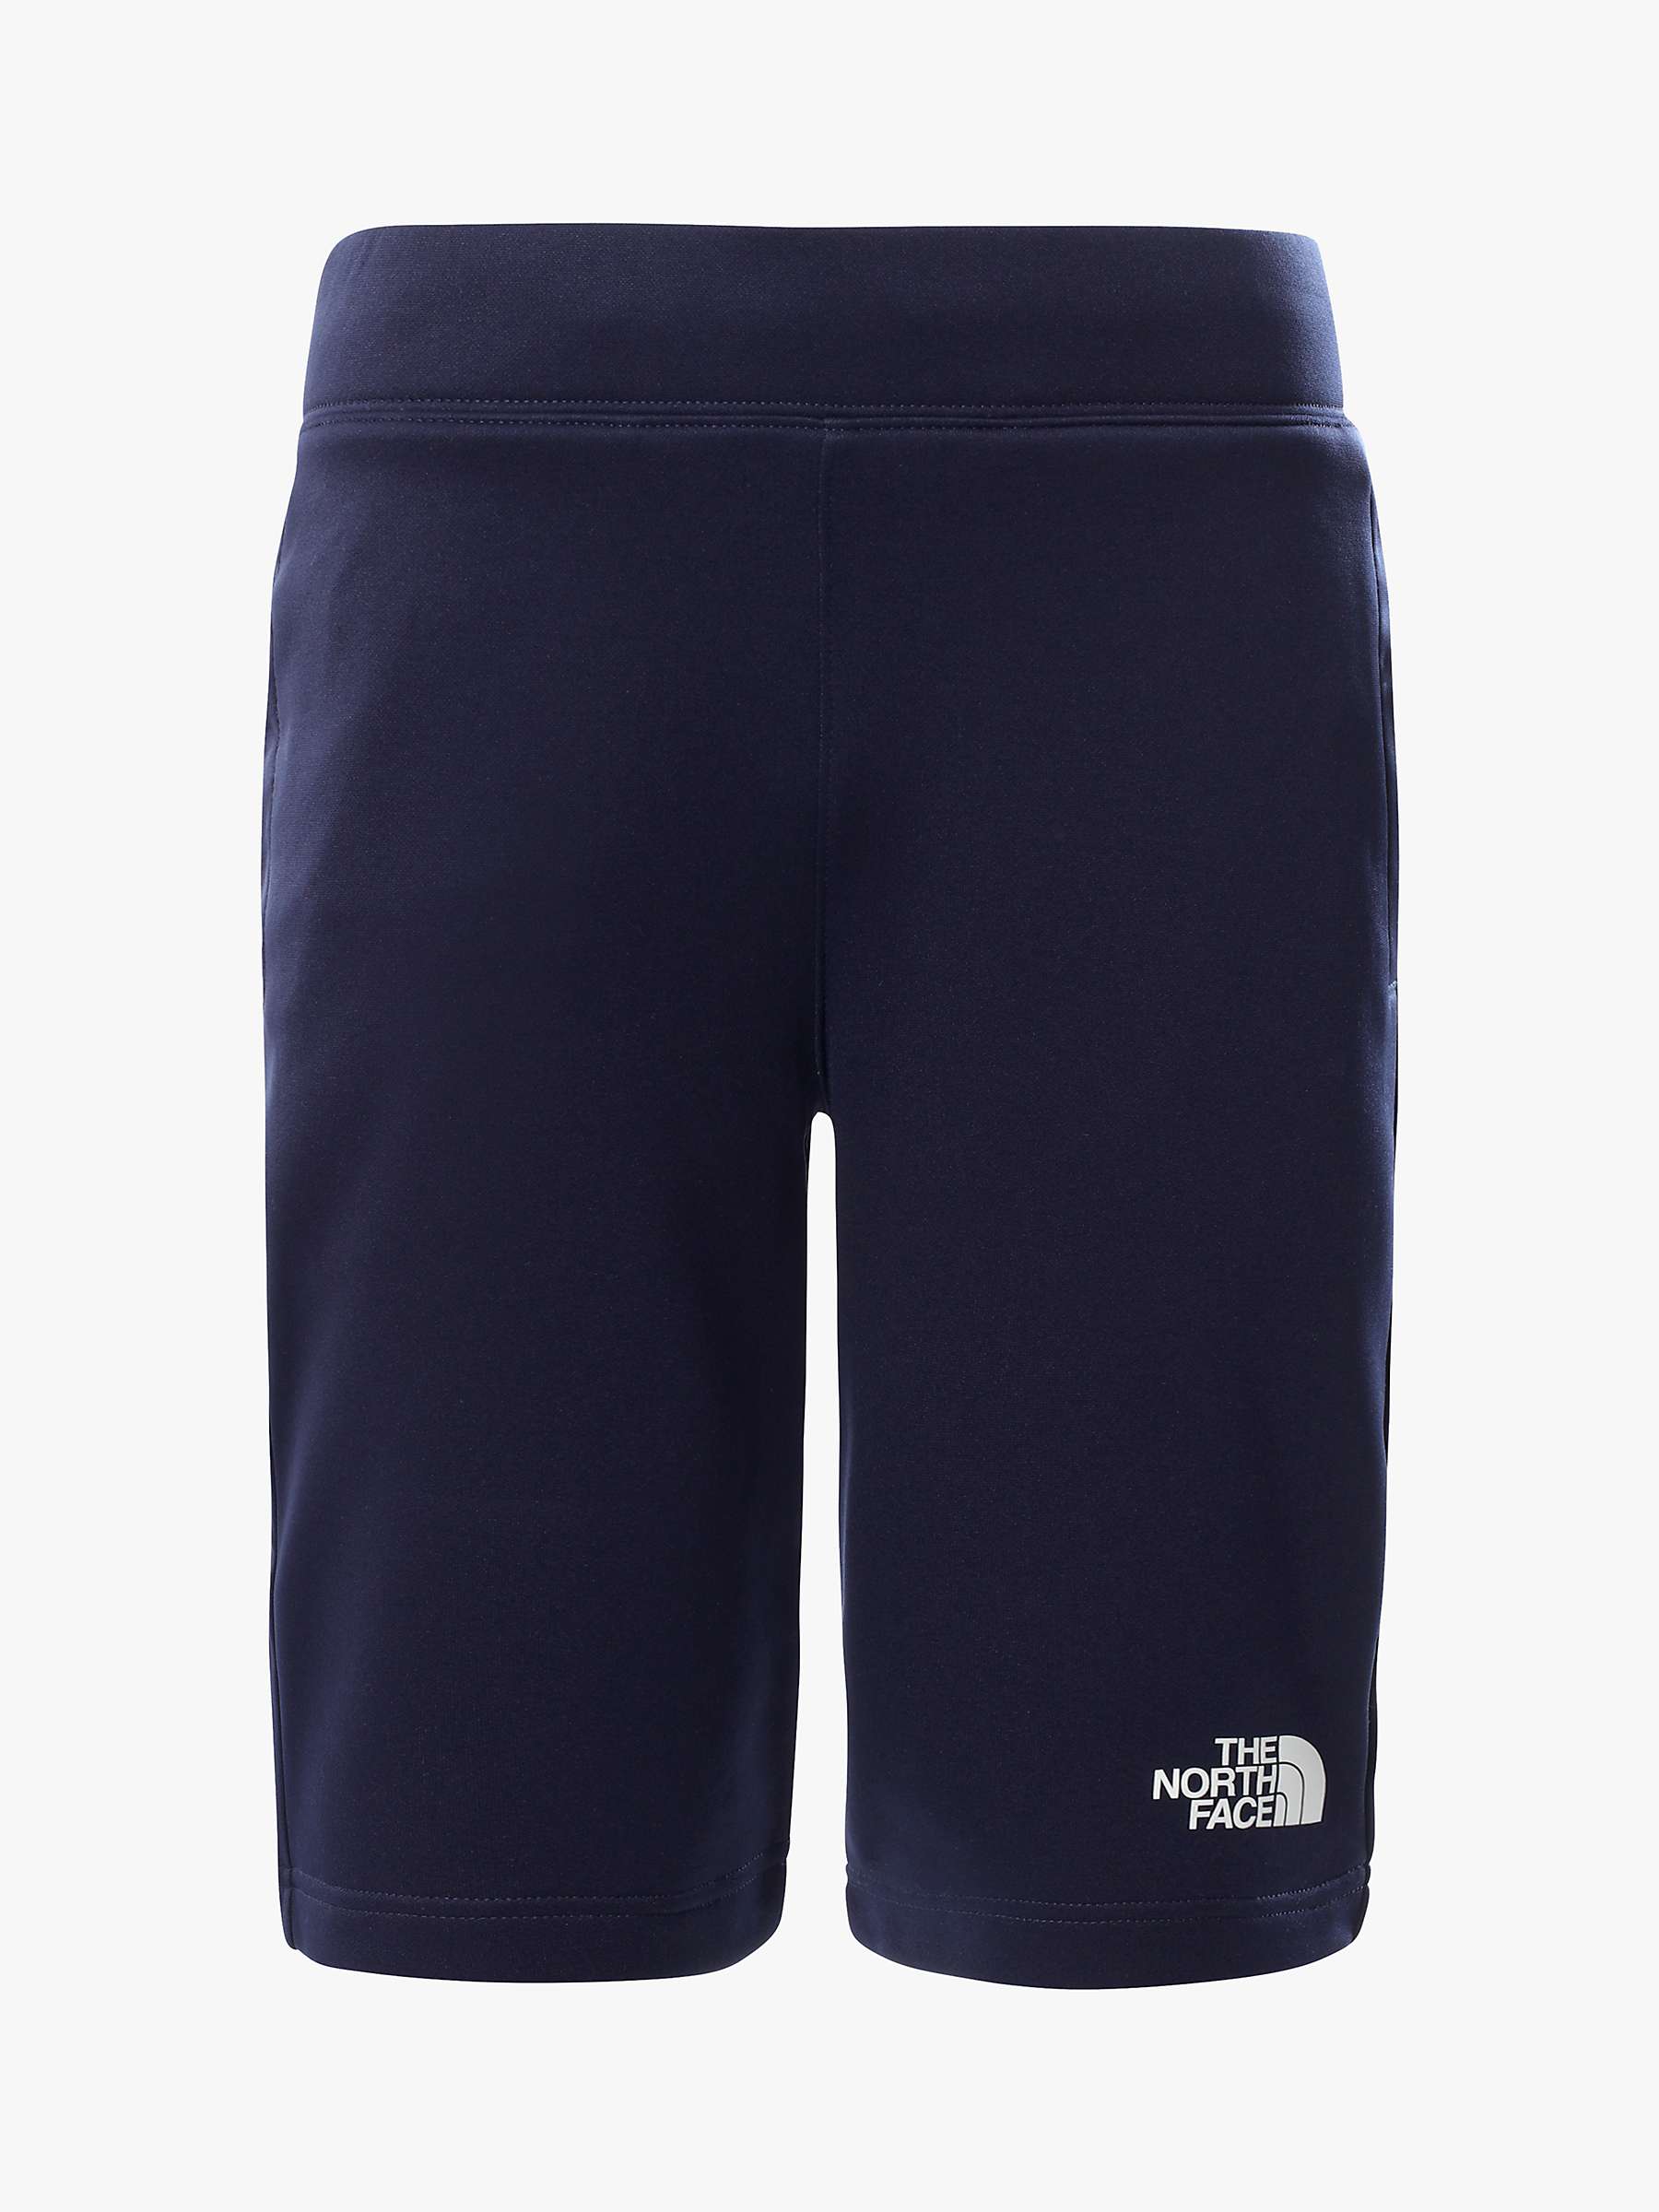 Buy The North Face Kids' Surgent Shorts Online at johnlewis.com